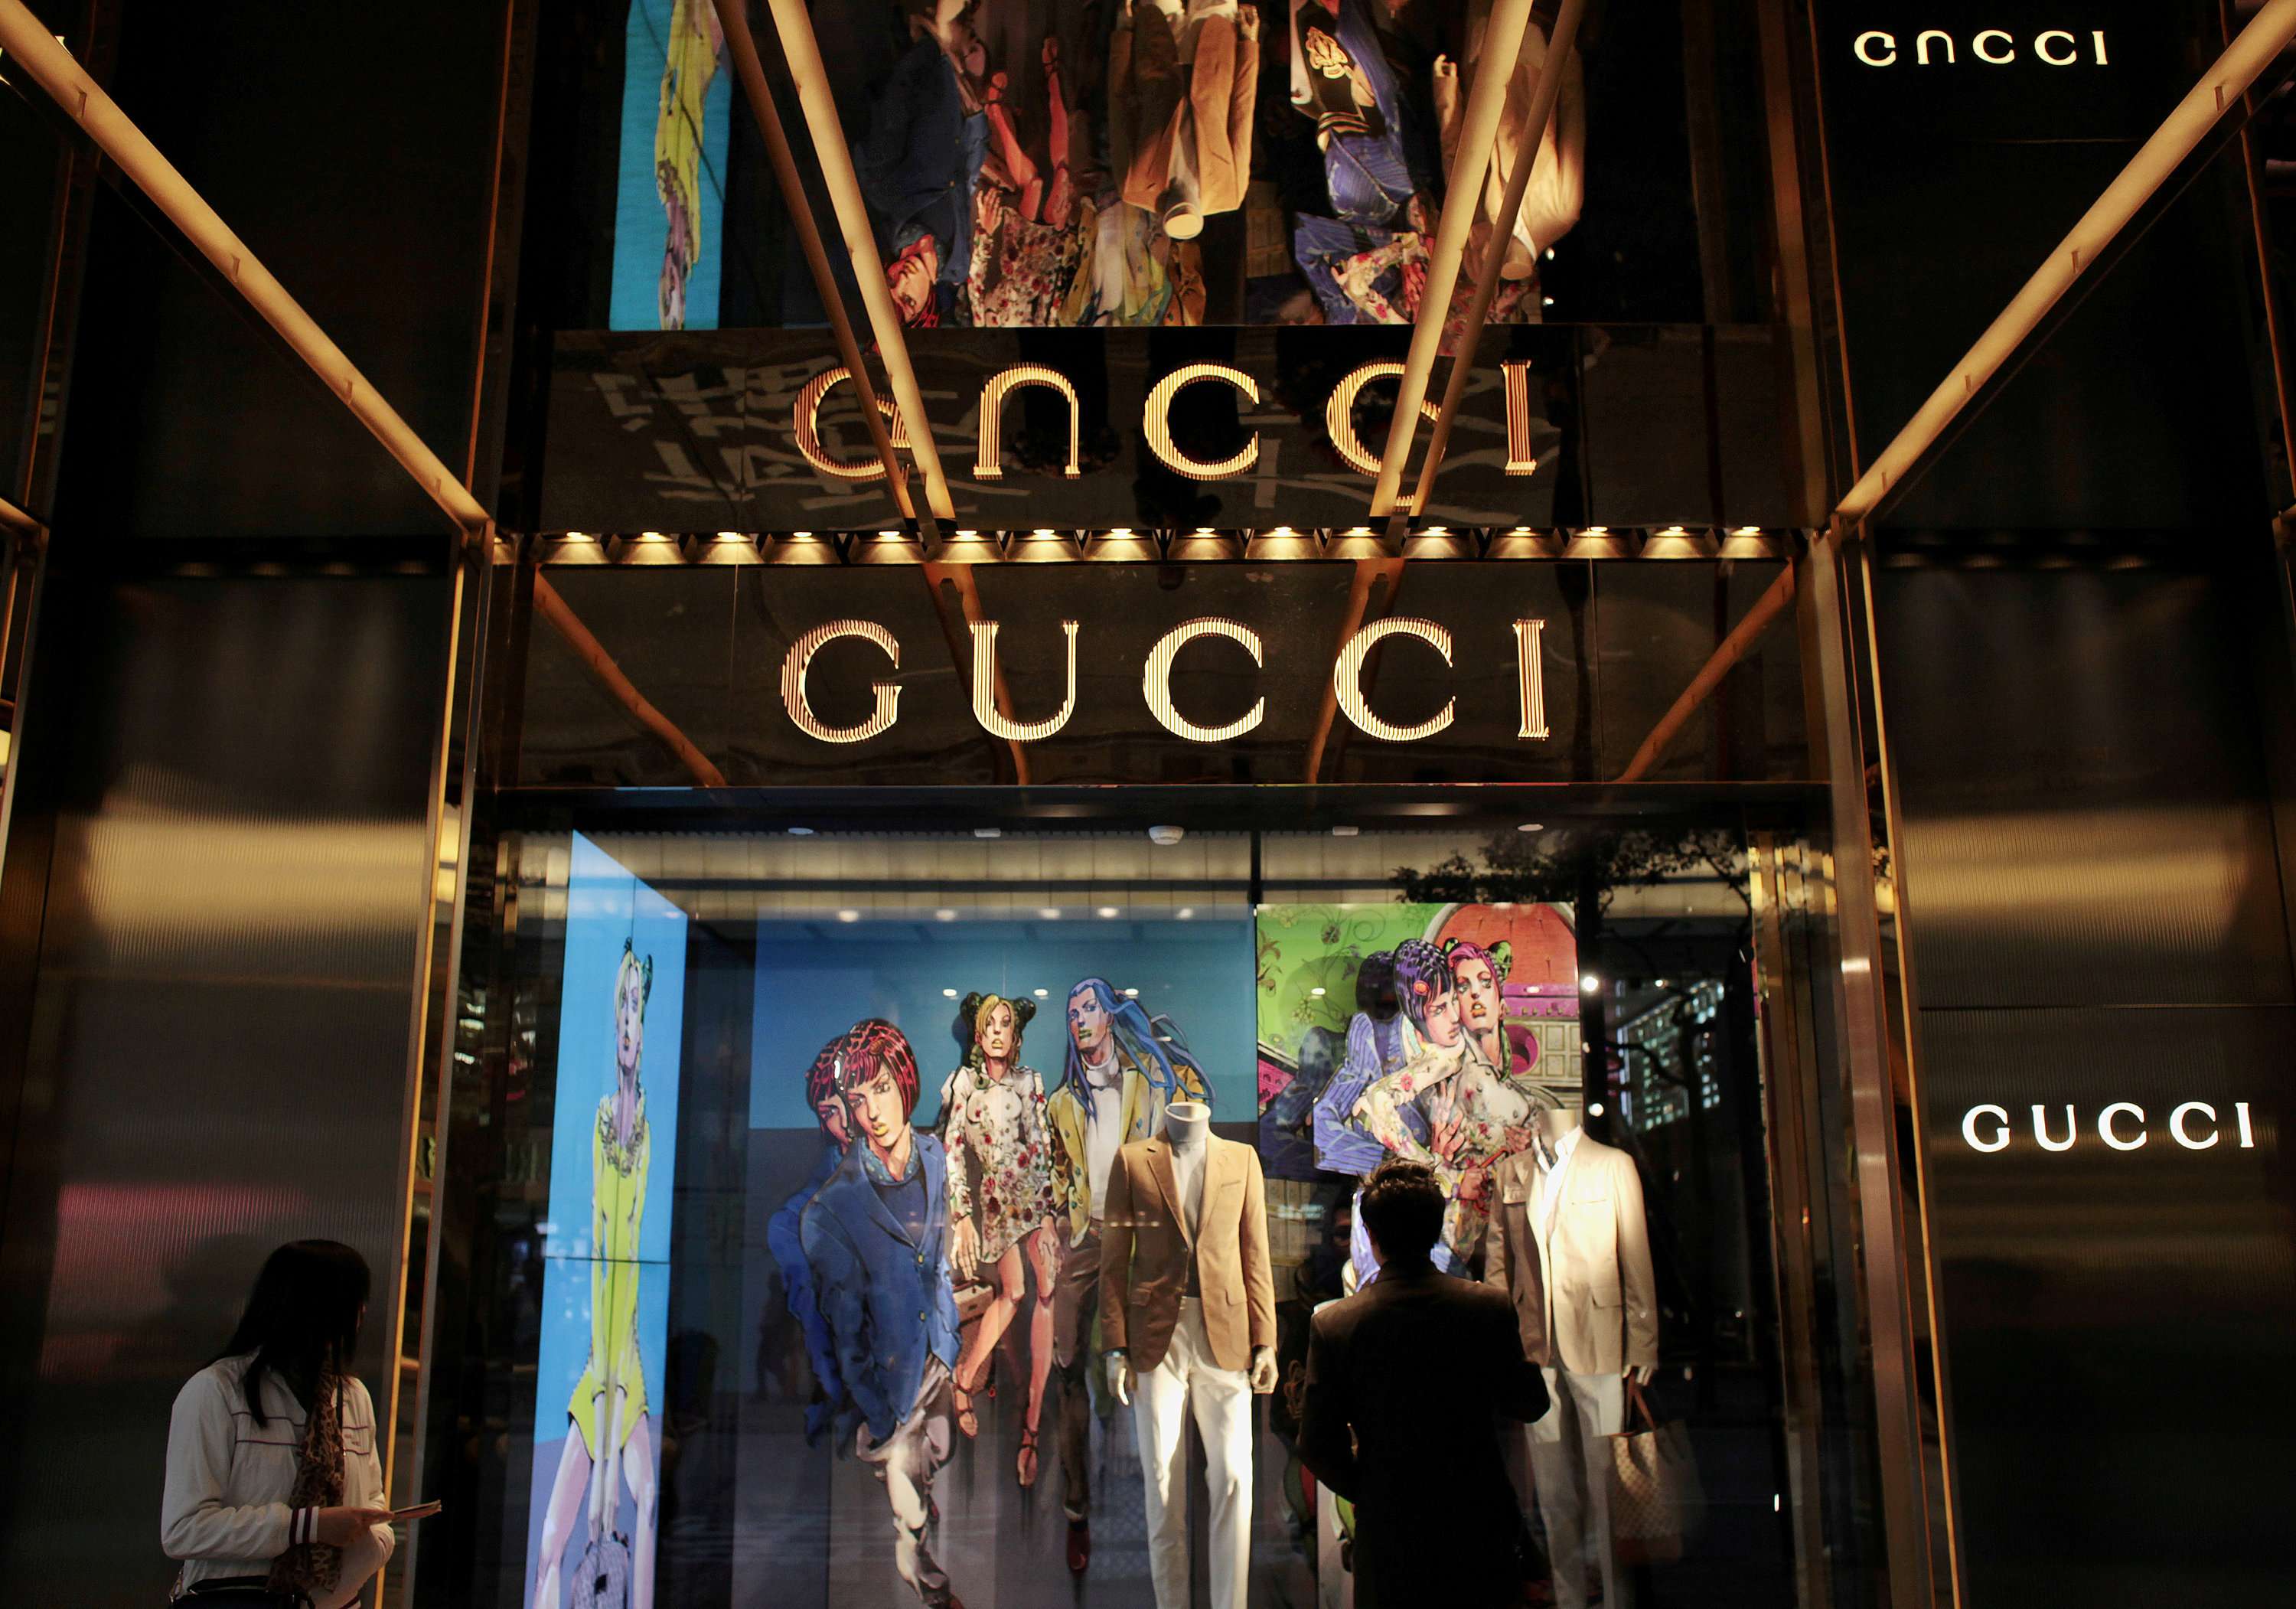 A Gucci store in Tsim Sha Tsui. A recent census report shows that Putonghua has replaced English as the second-most spoken language by residents after Cantonese. Photo: Reuters